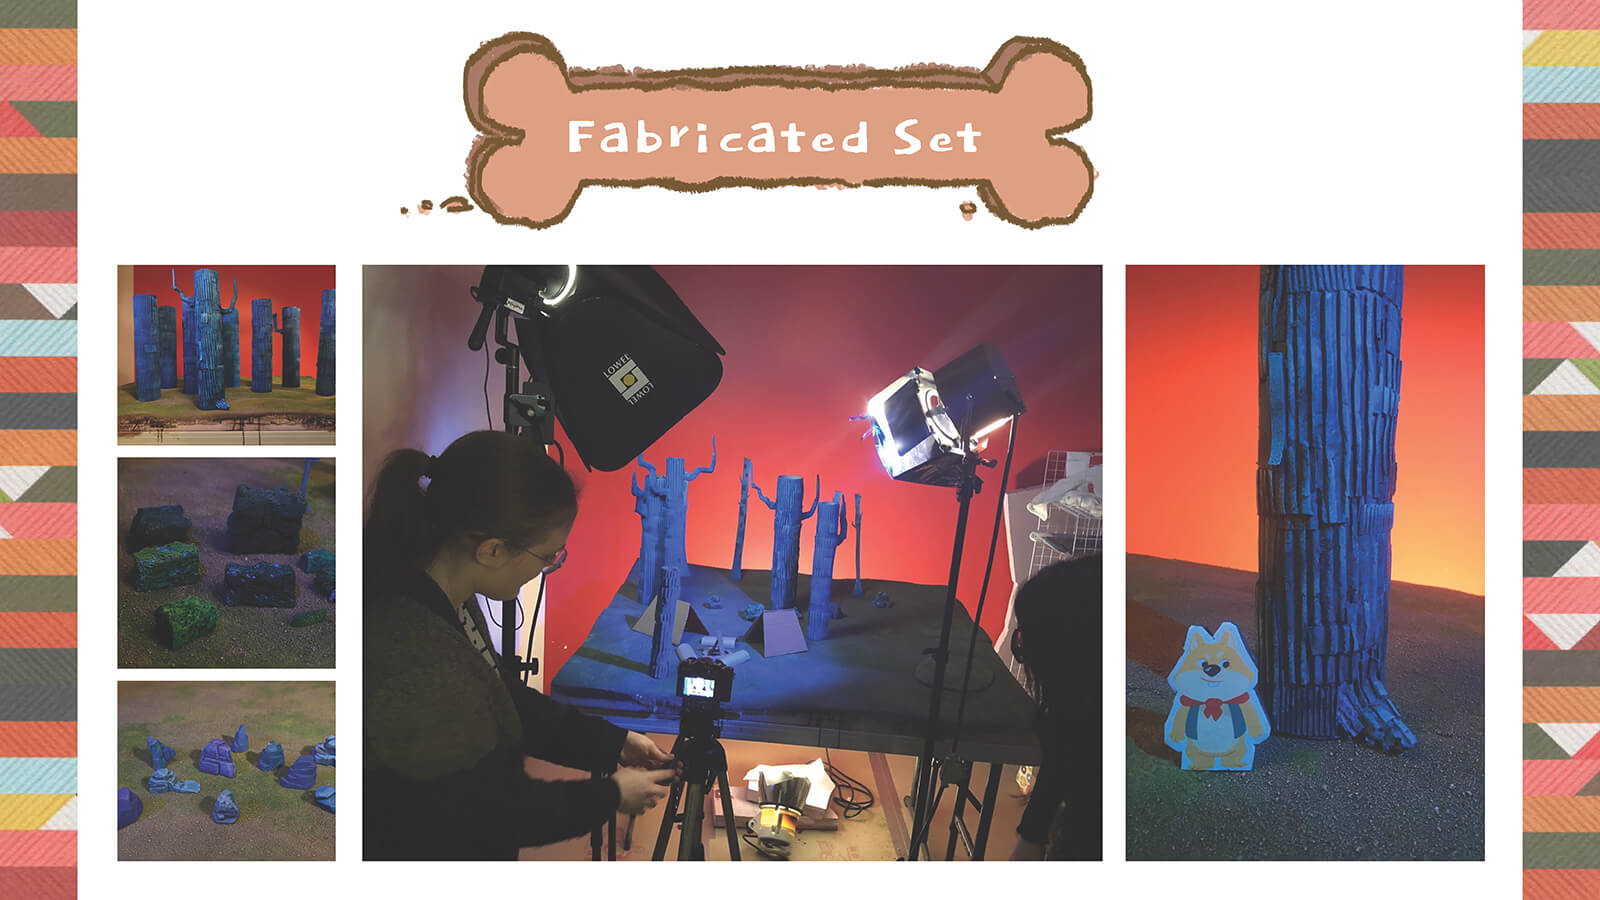 Photos of the practical, fabricated set for the animated film PrePAWsterous.